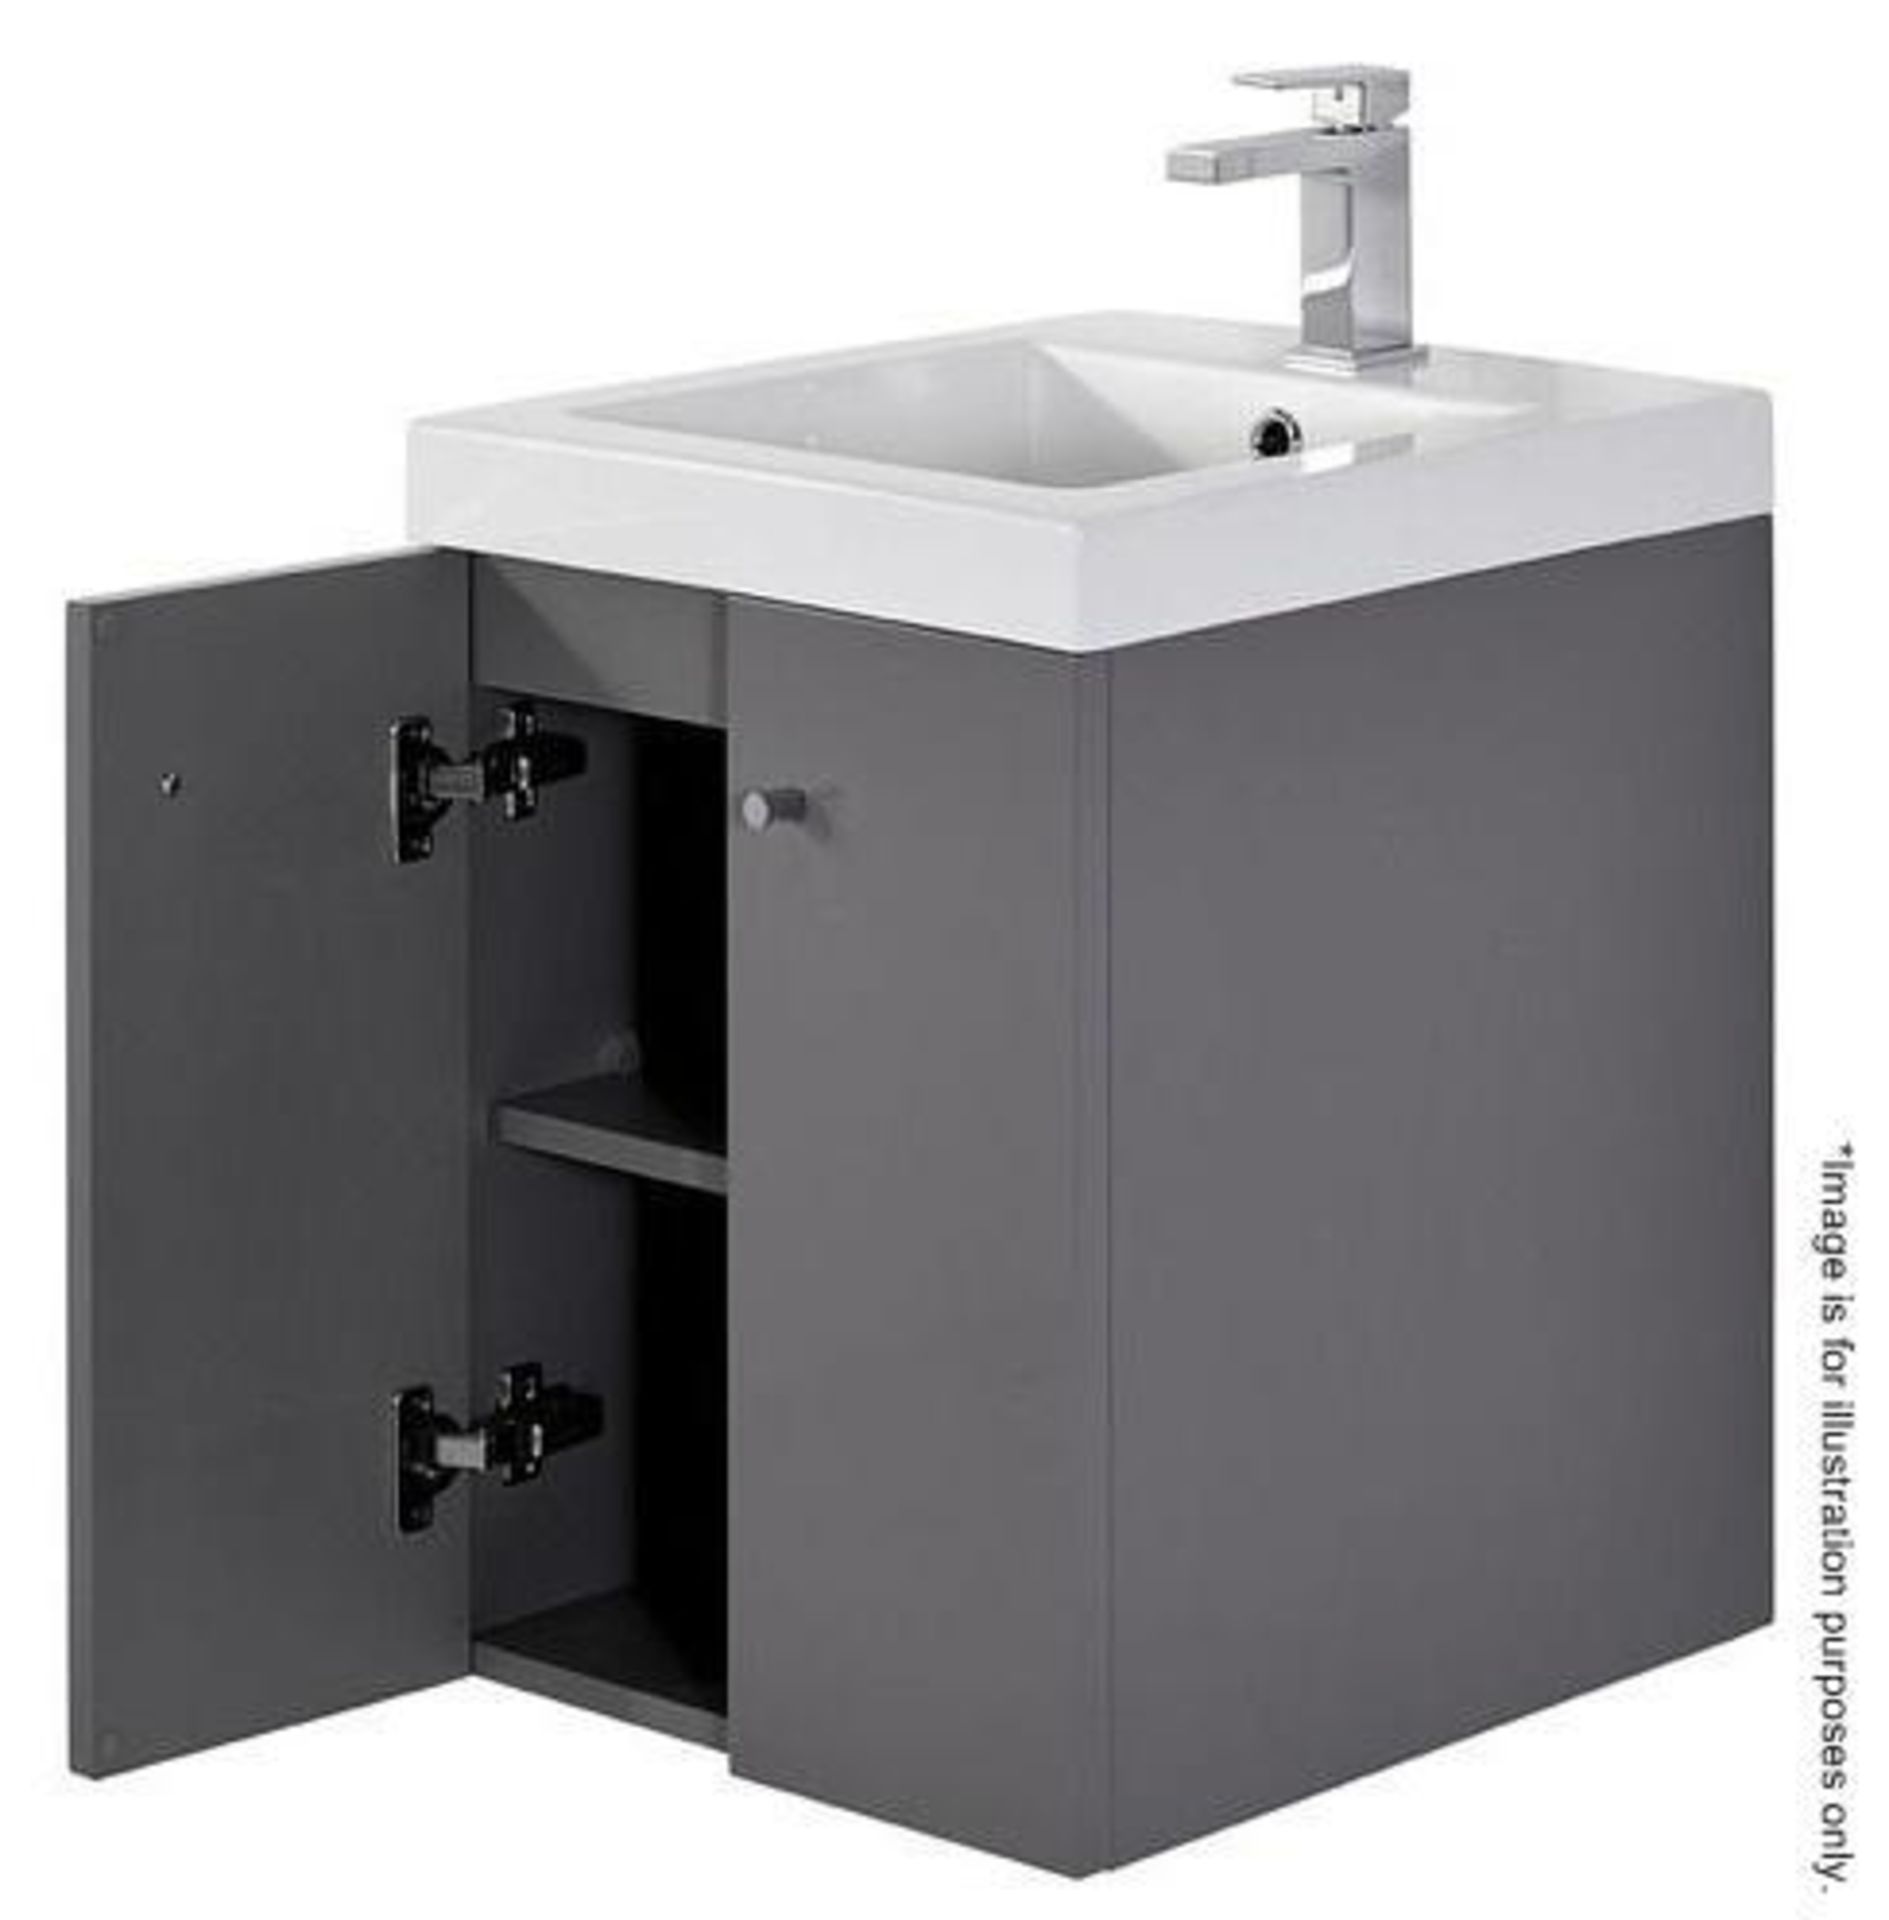 10 x Alpine Duo 400 Wall Hung Vanity Units In Gloss Grey - Brand New Boxed Stock - Dimensions: H49 x